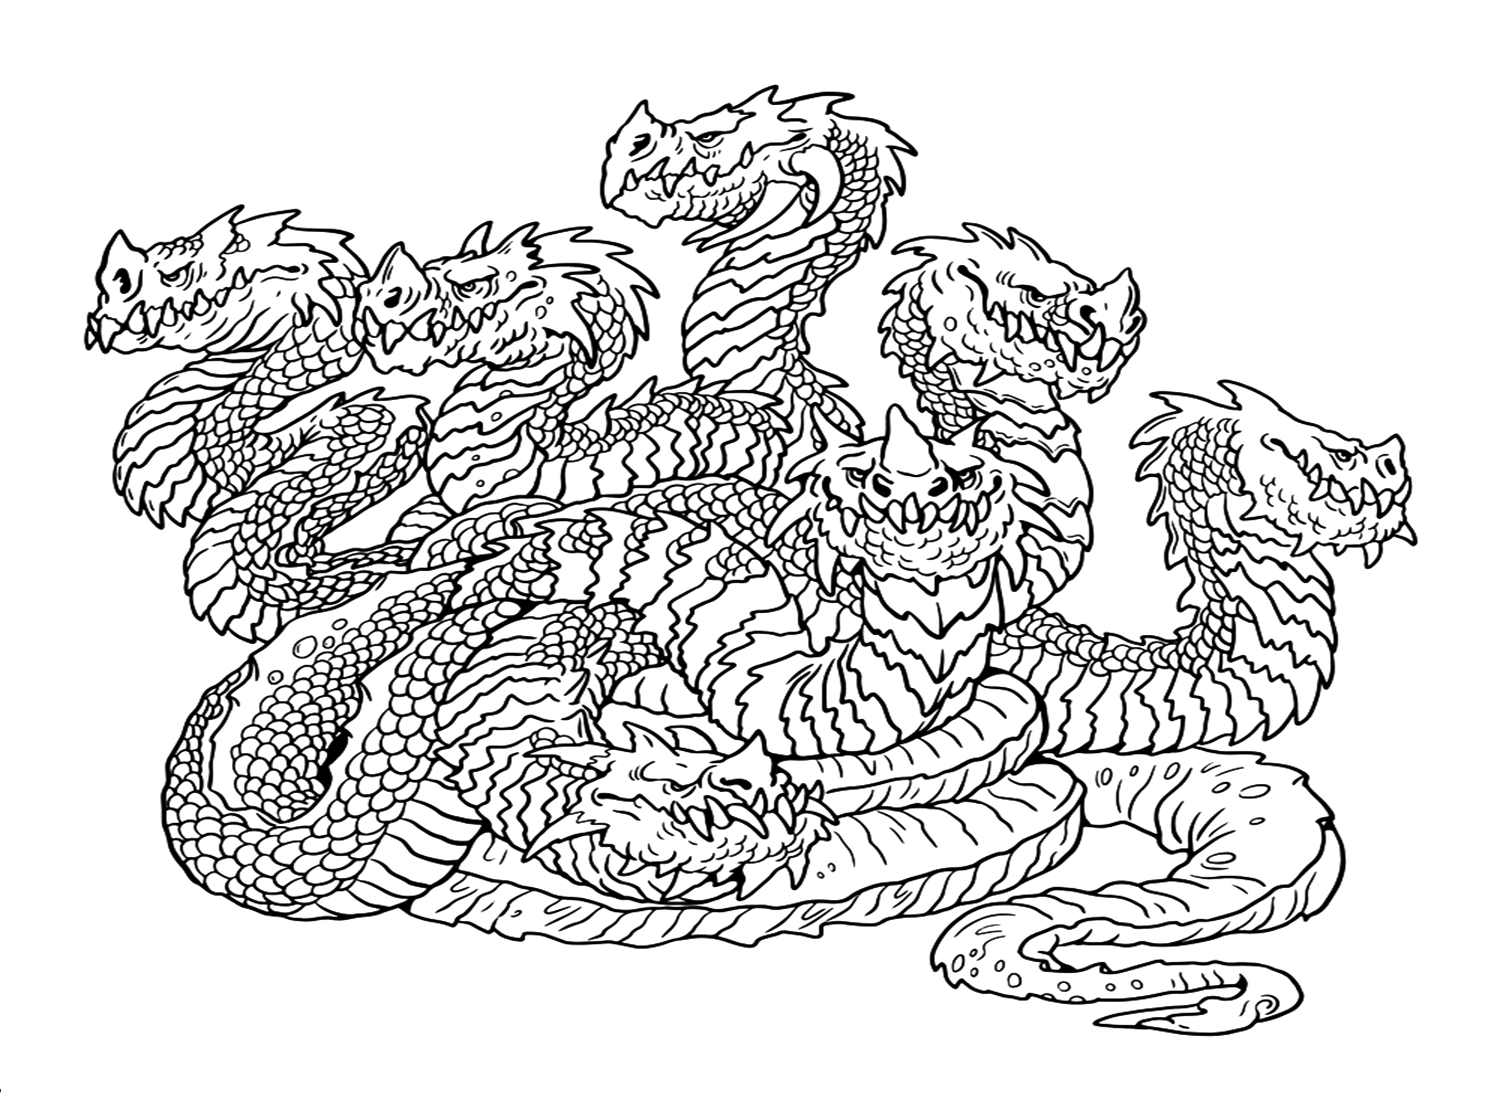 Hydra Dragon Coloring Pages